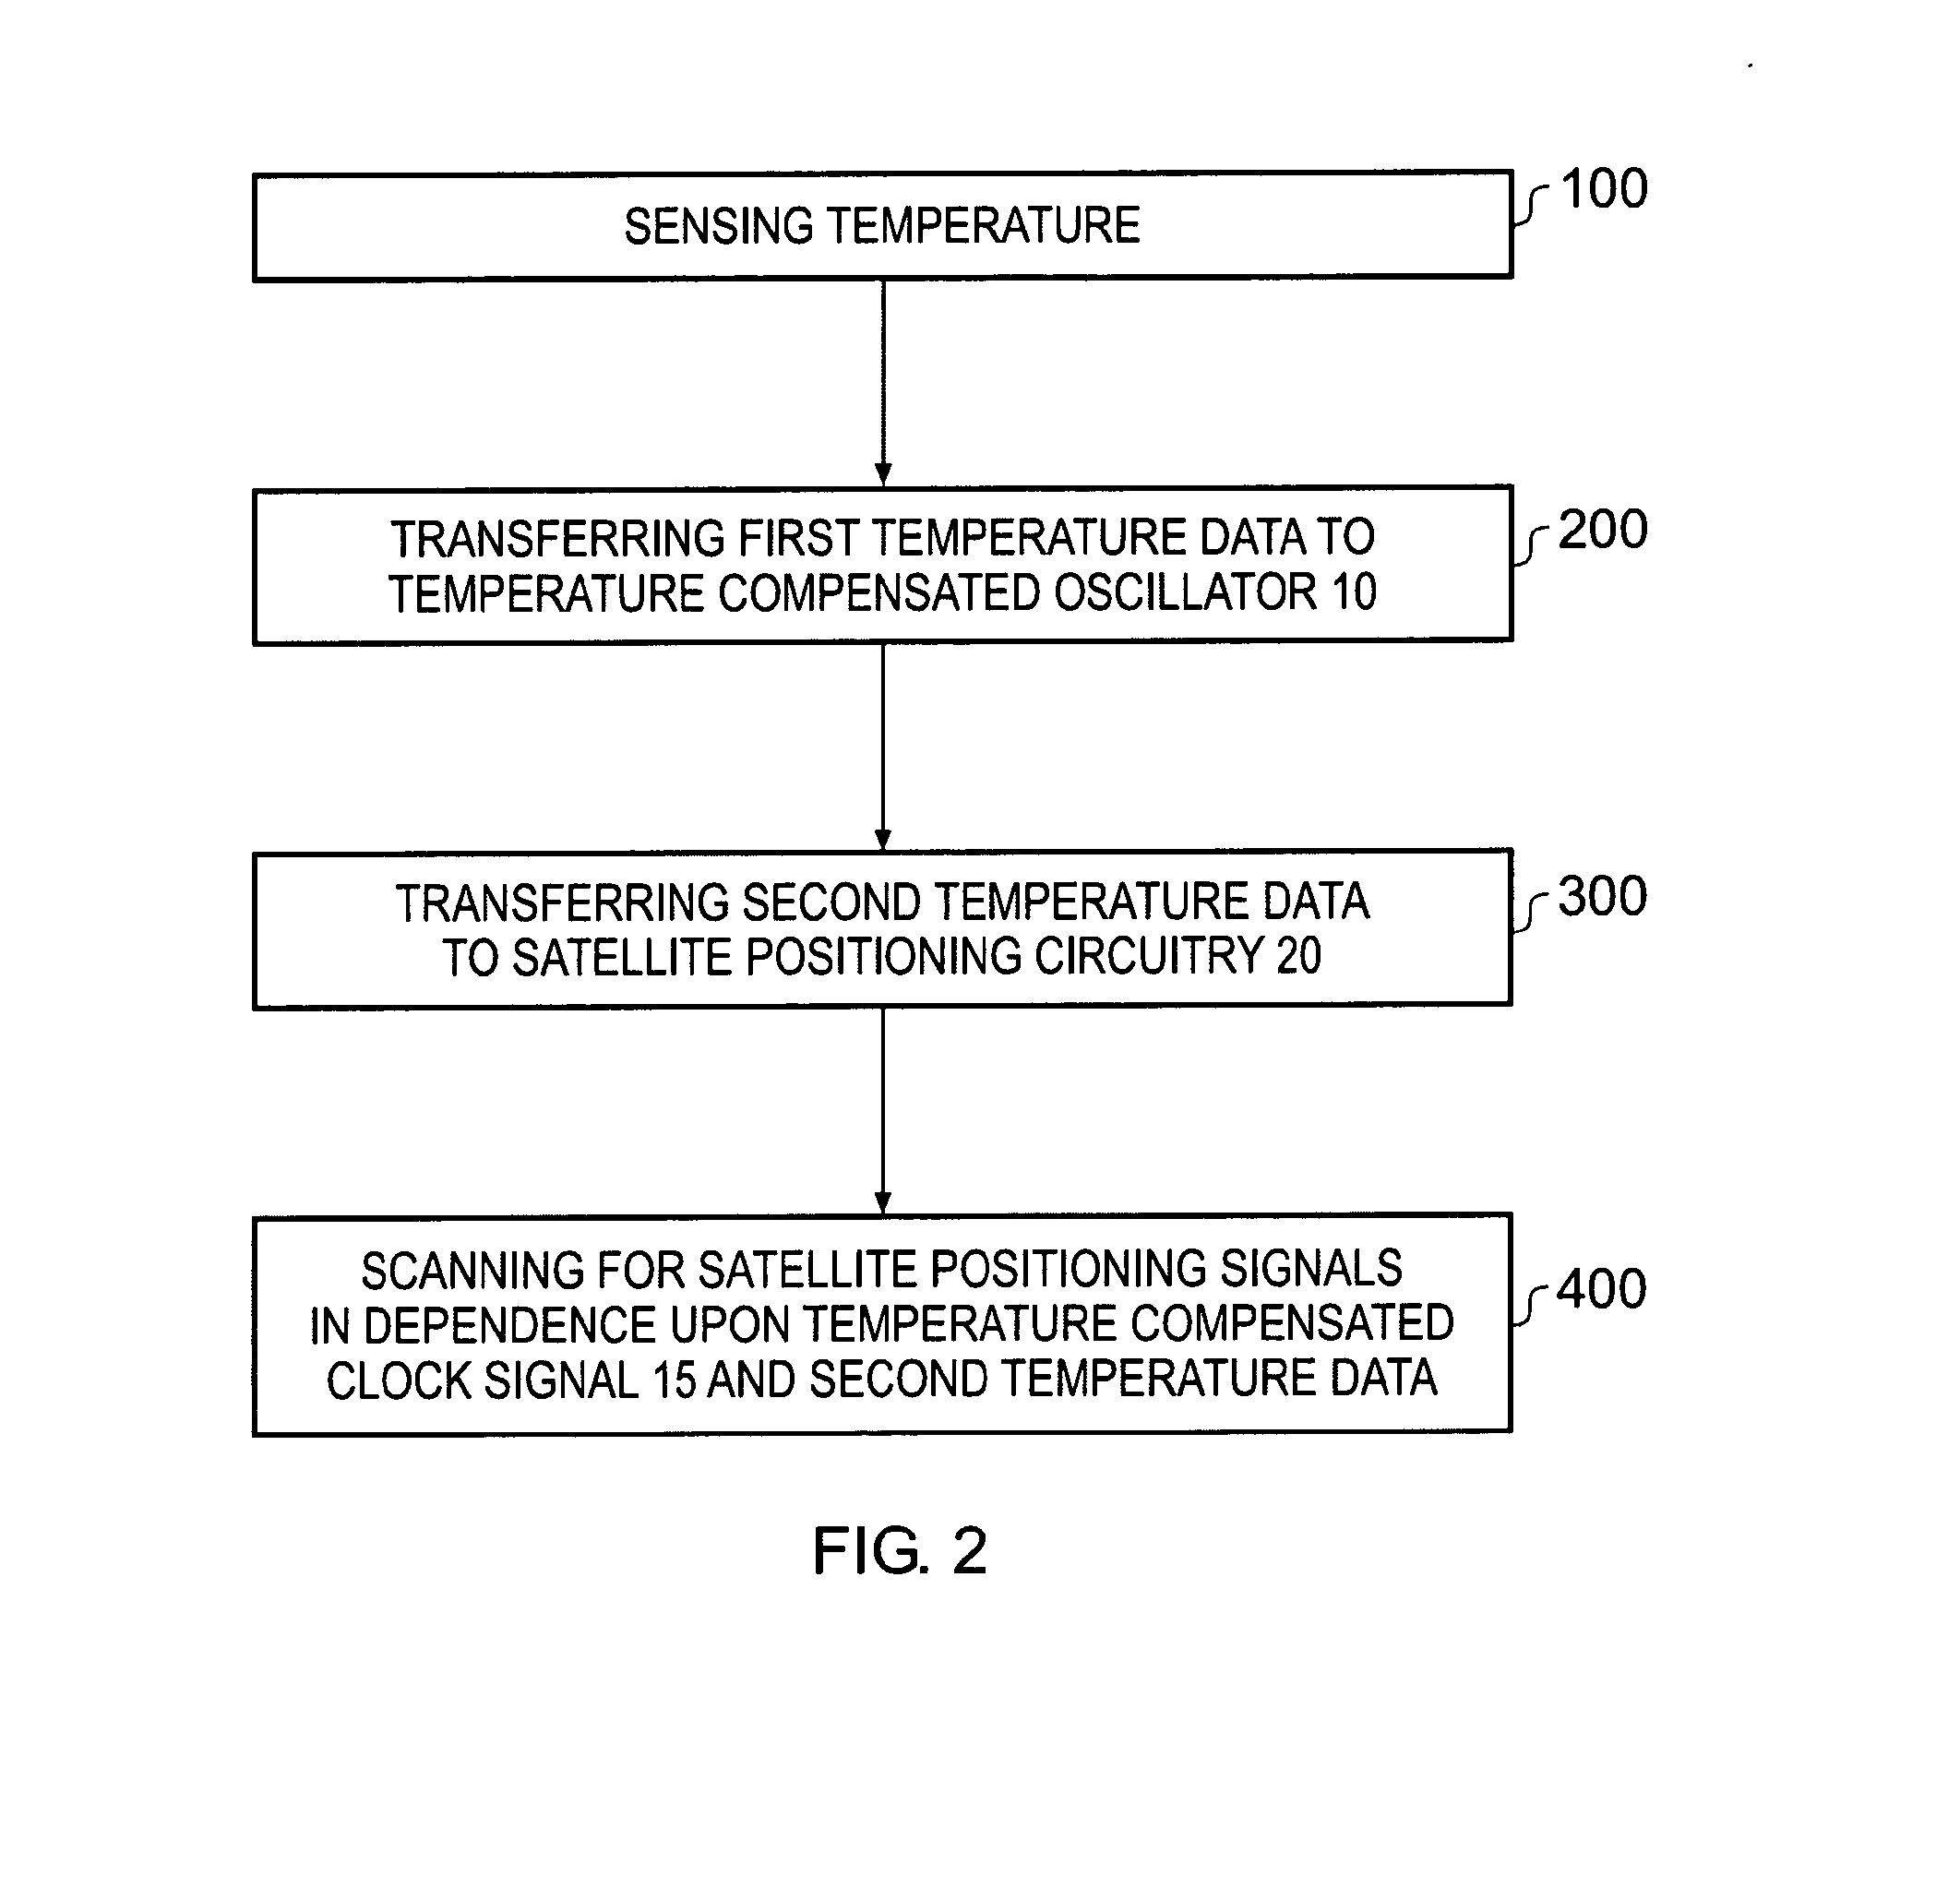 Temperature sensor for oscillator and for satellite positioning circuitry